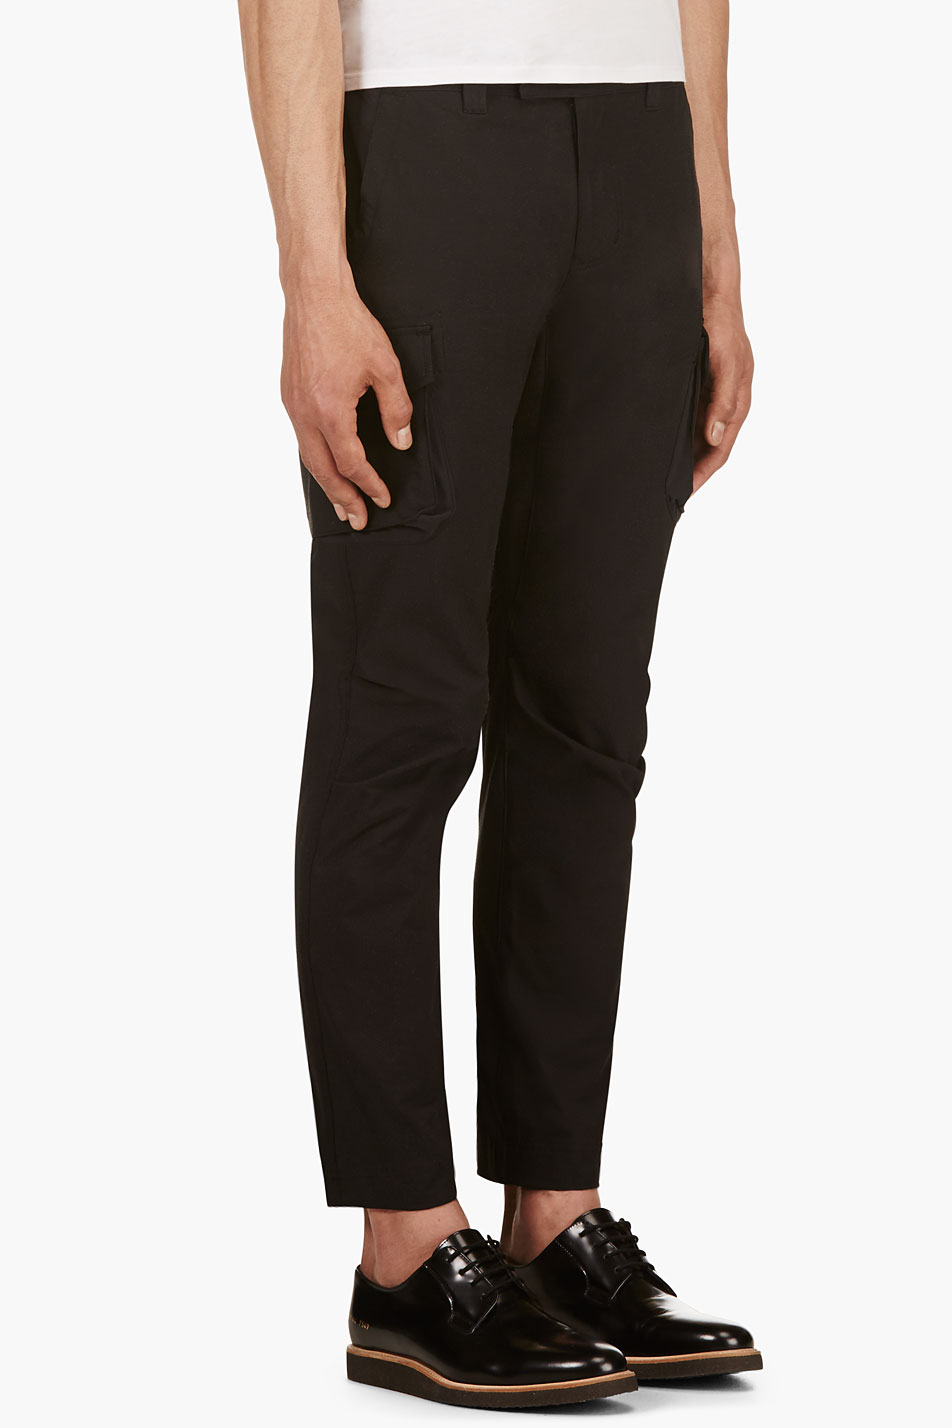 White Mountaineering Black Cropped Pertex Cargo Trousers in Black for ...